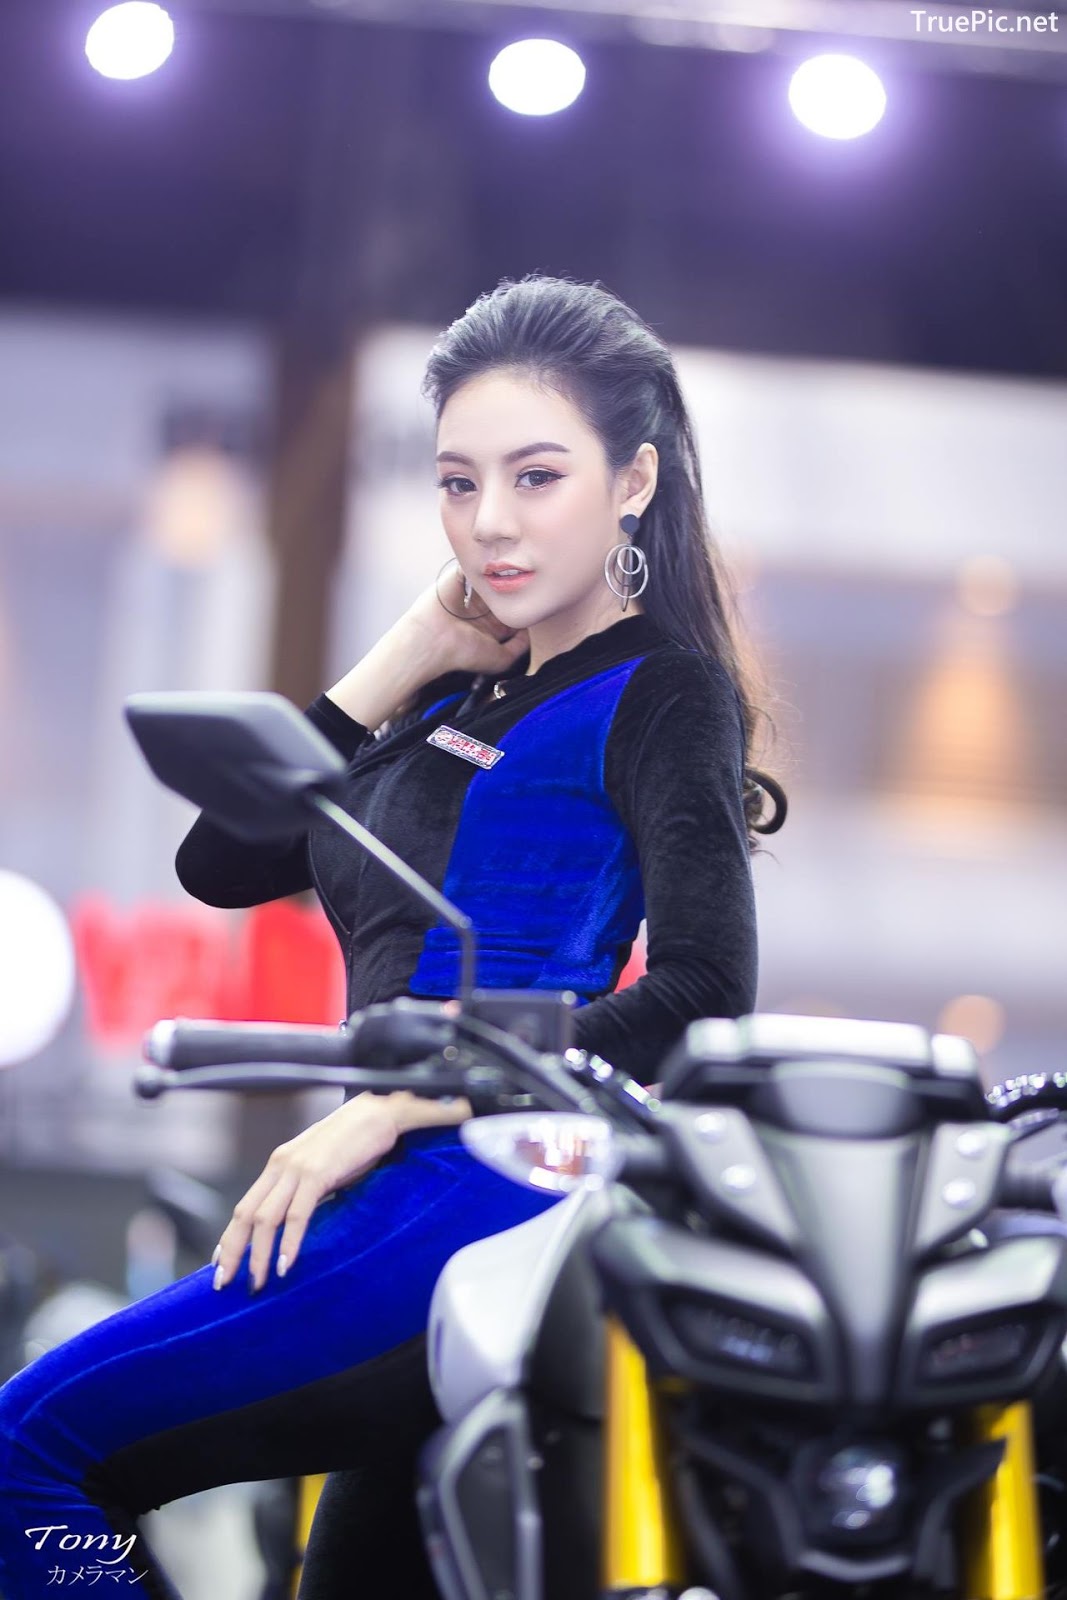 Image-Thailand-Hot-Model-Thai-Racing-Girl-At-Motor-Expo-2018-TruePic.net- Picture-34